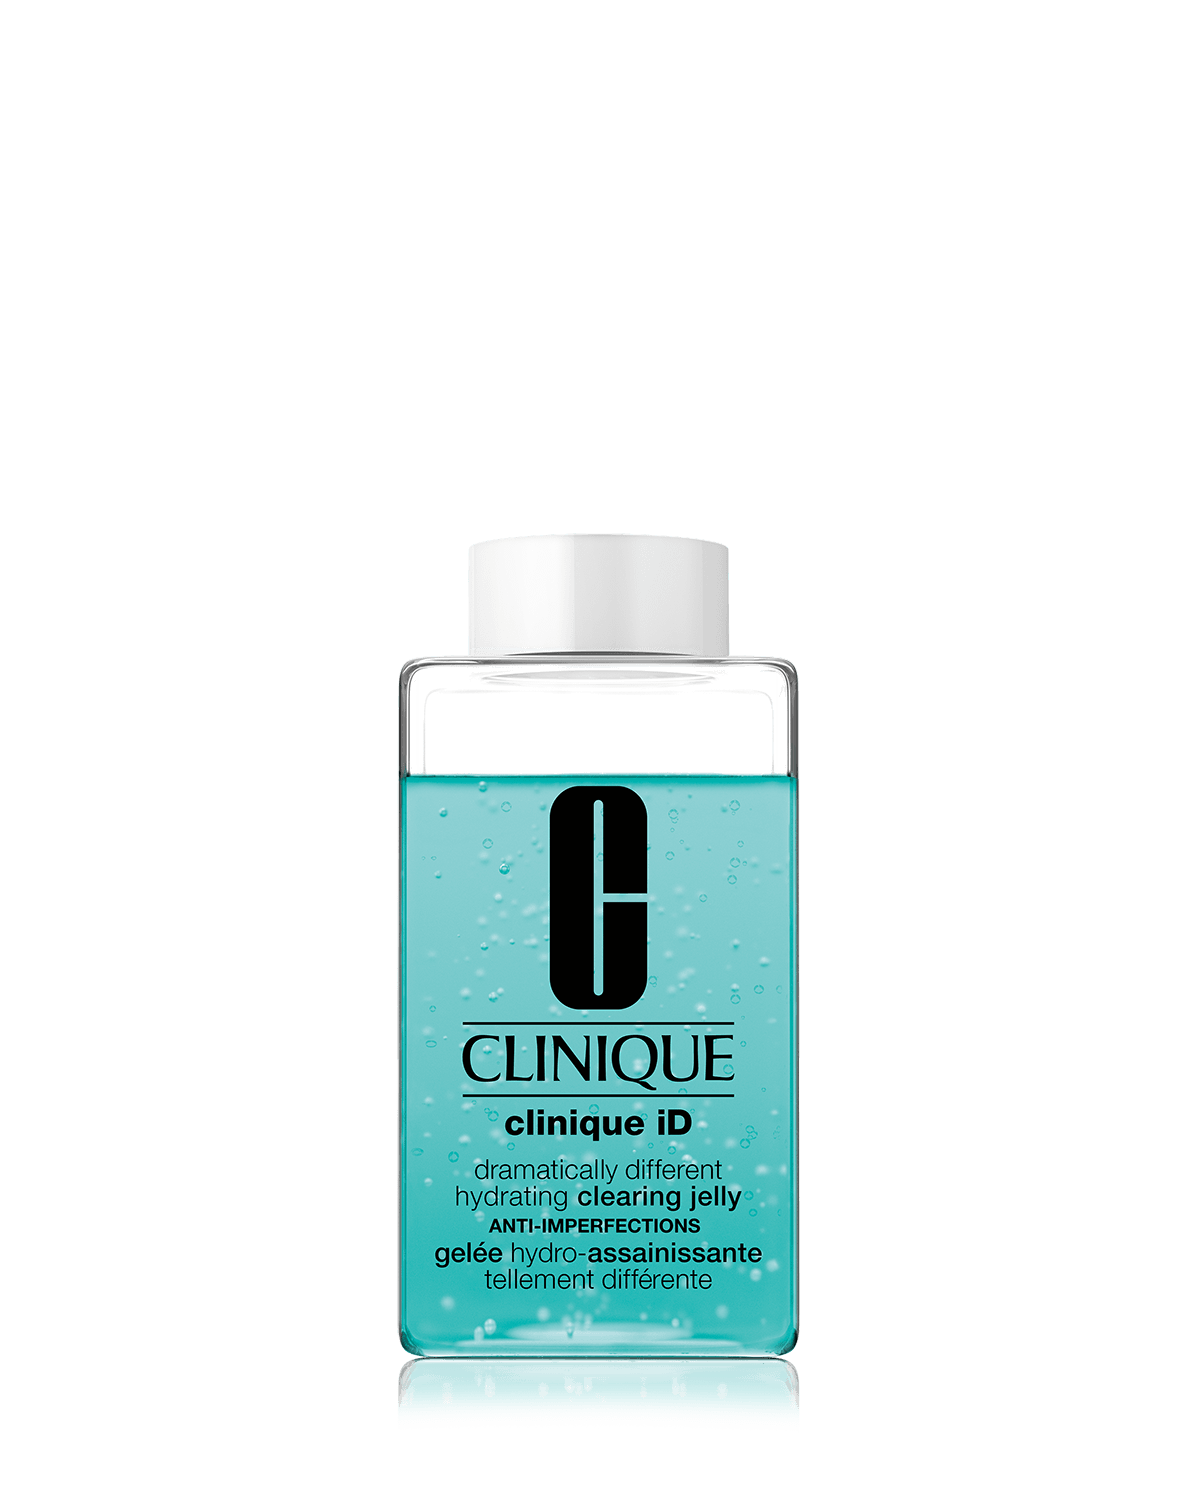 Clinique iD™: Dramatically Different™ Hydrating Clearing Jelly